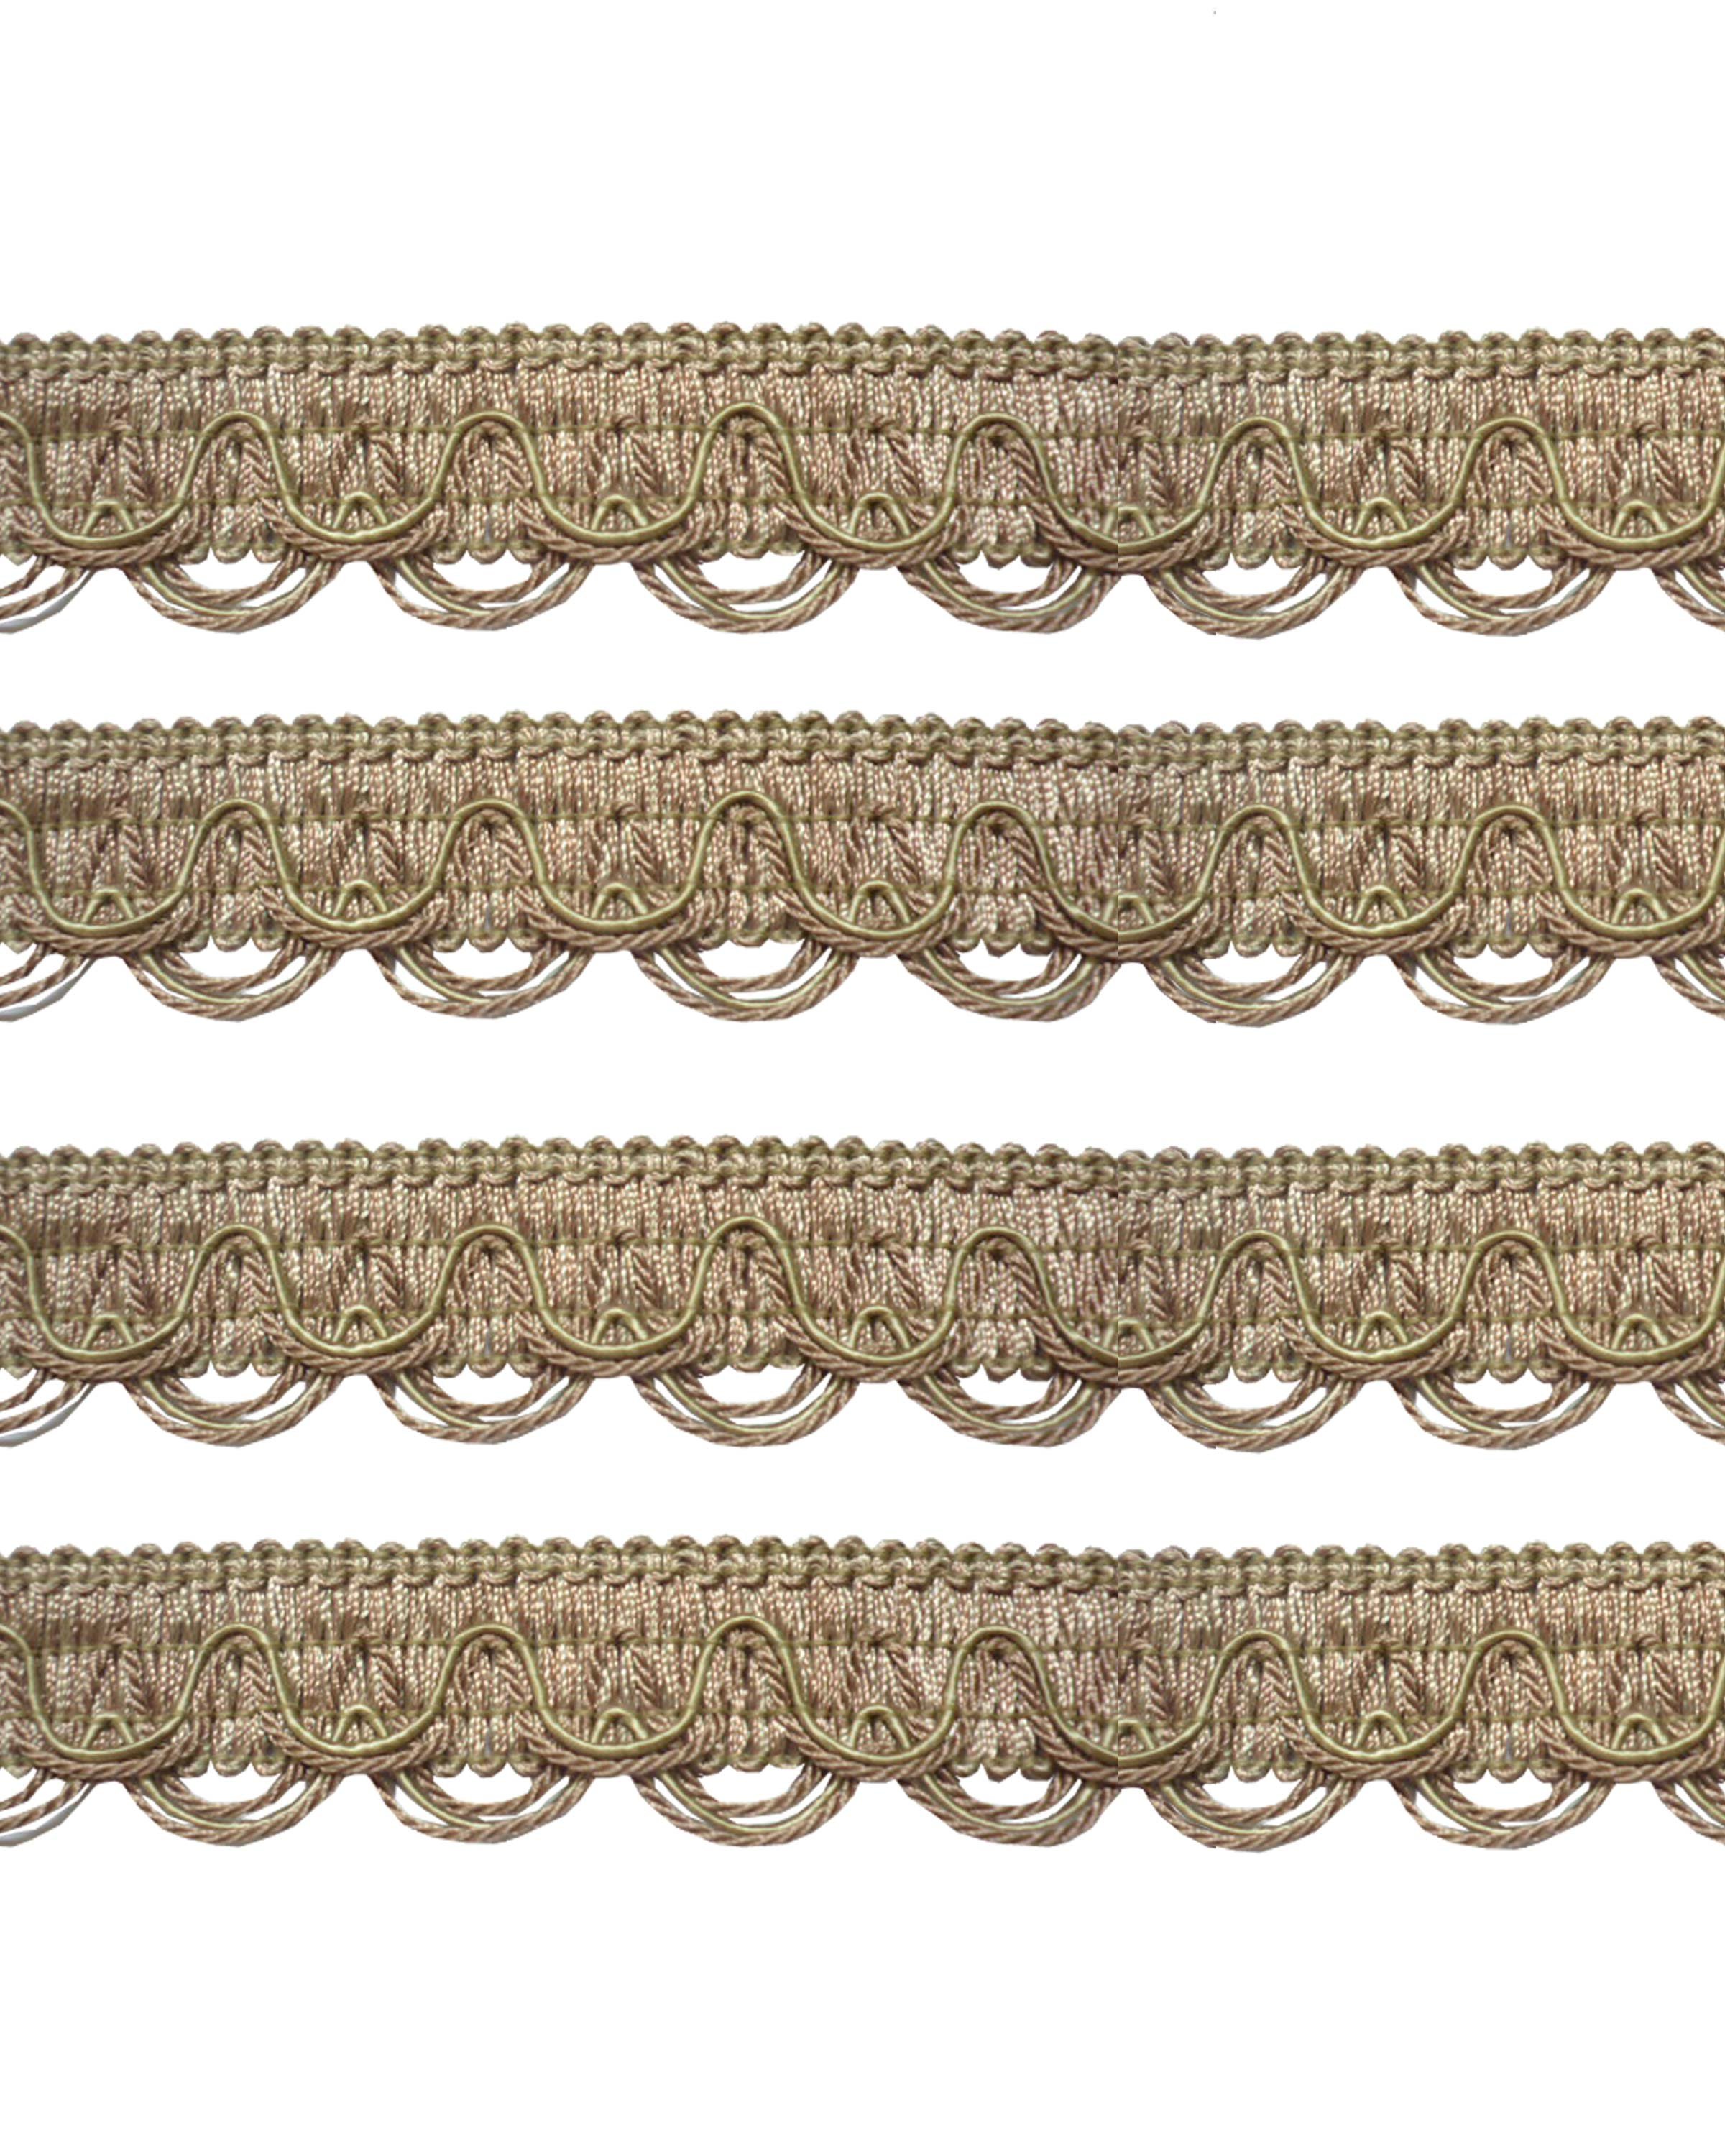 Scalloped Braid - Silver / Mauve 30mm Price is for 5 metres